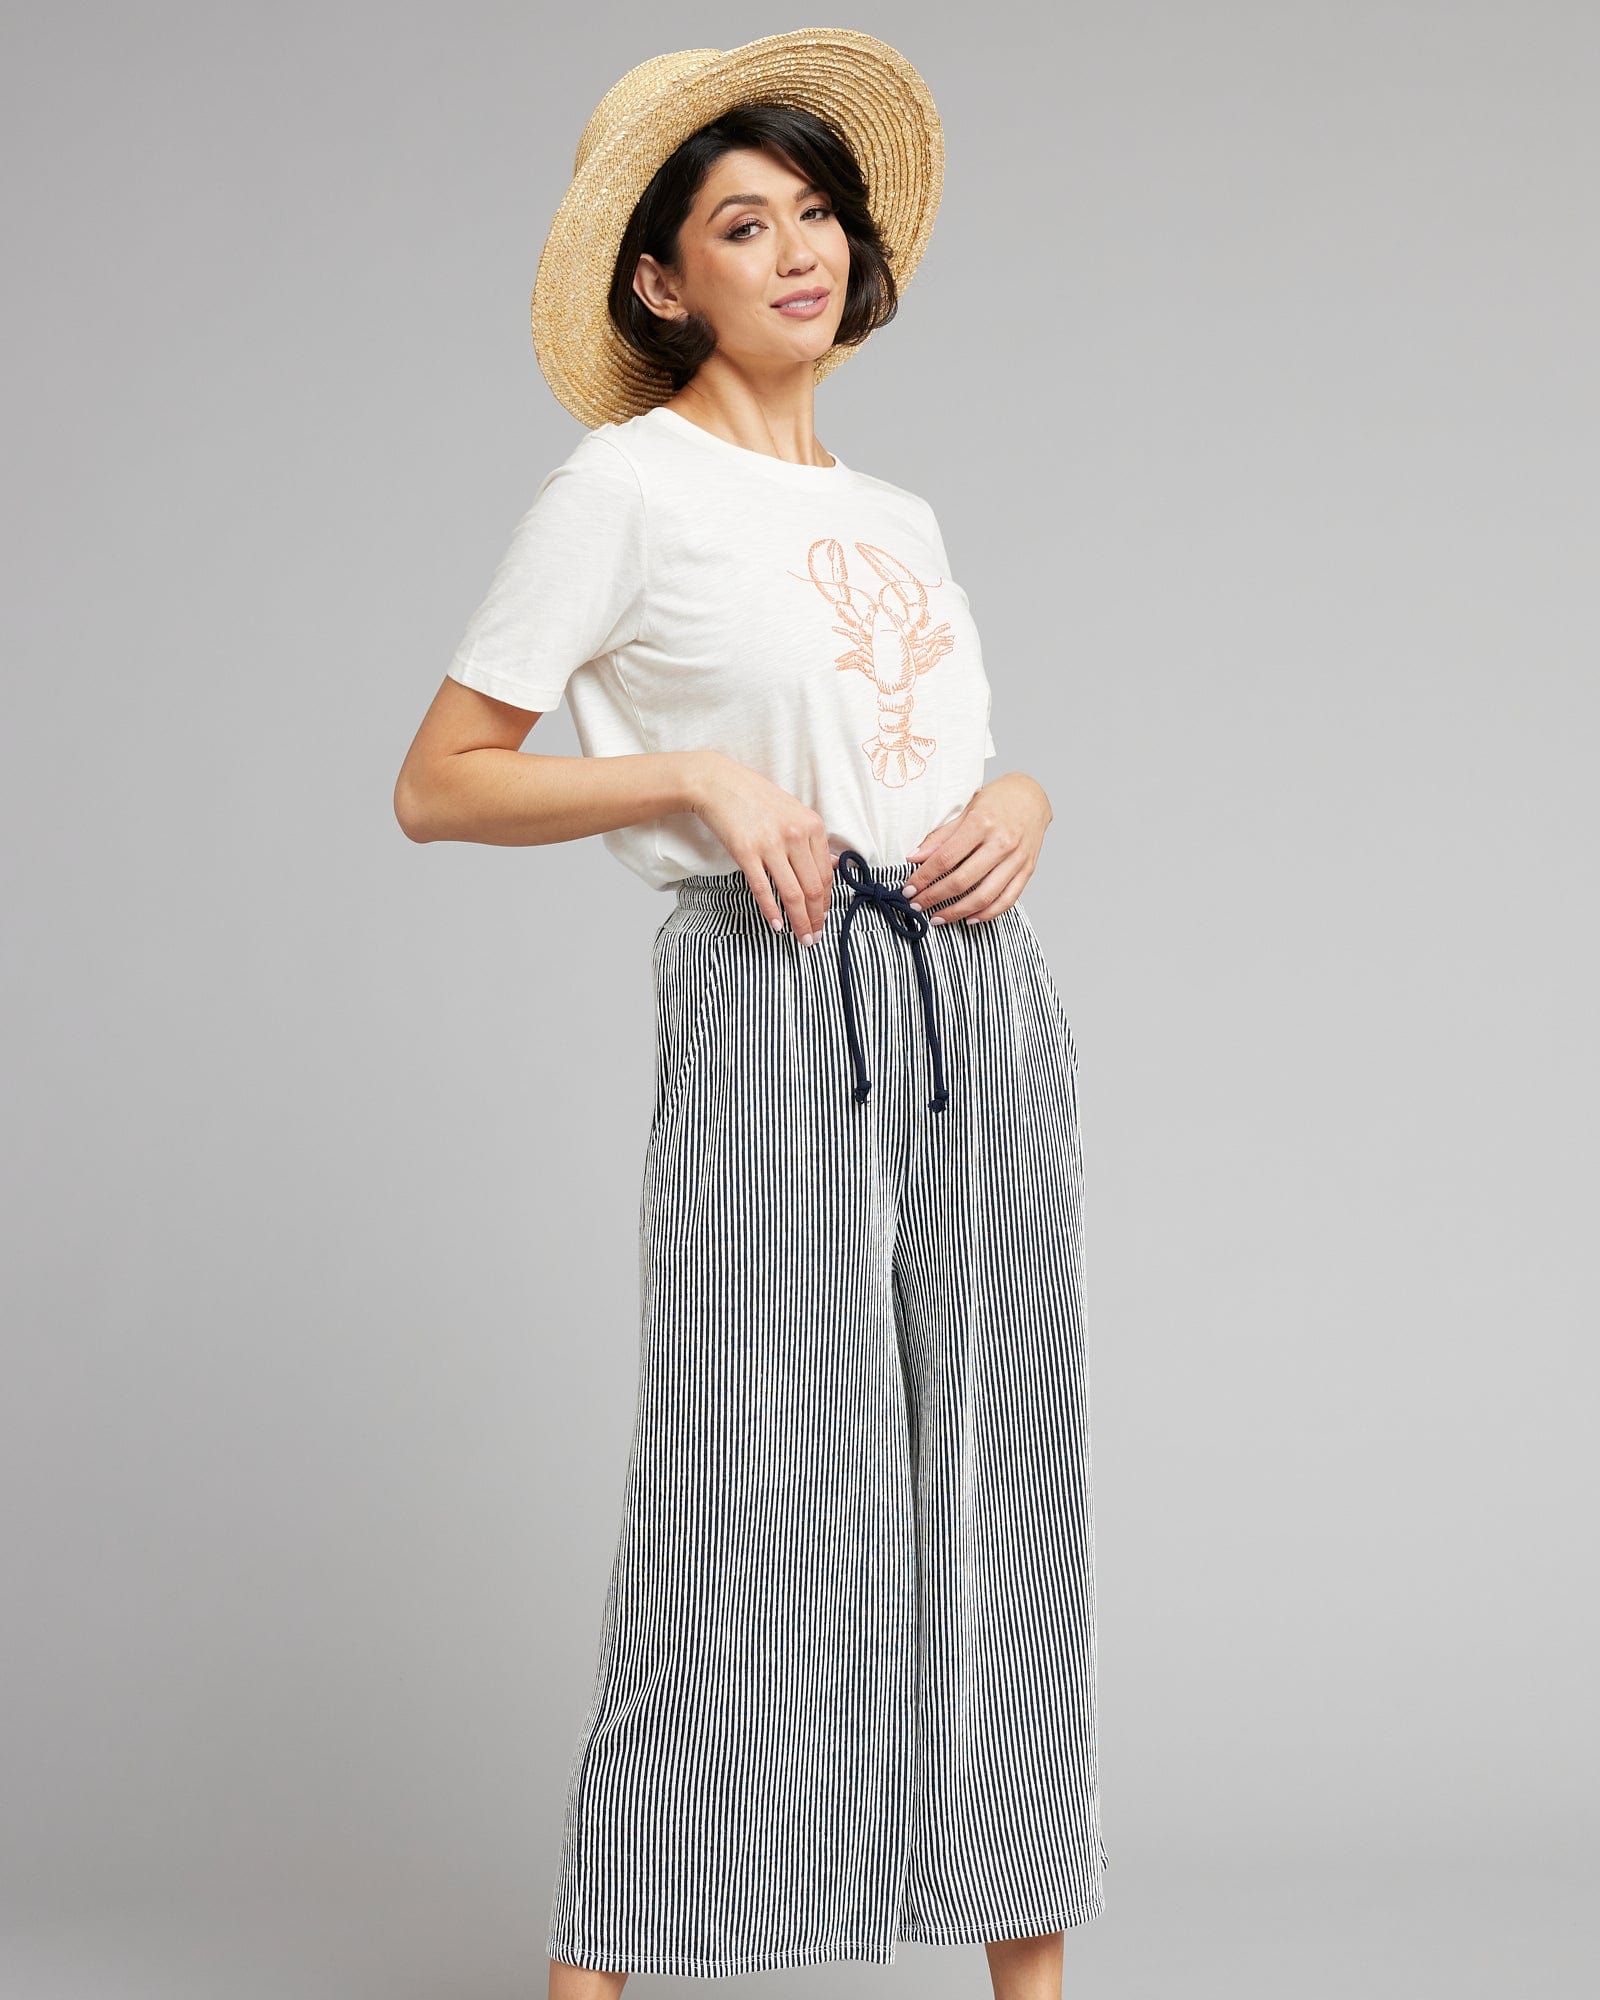 Woman in gray and white capris